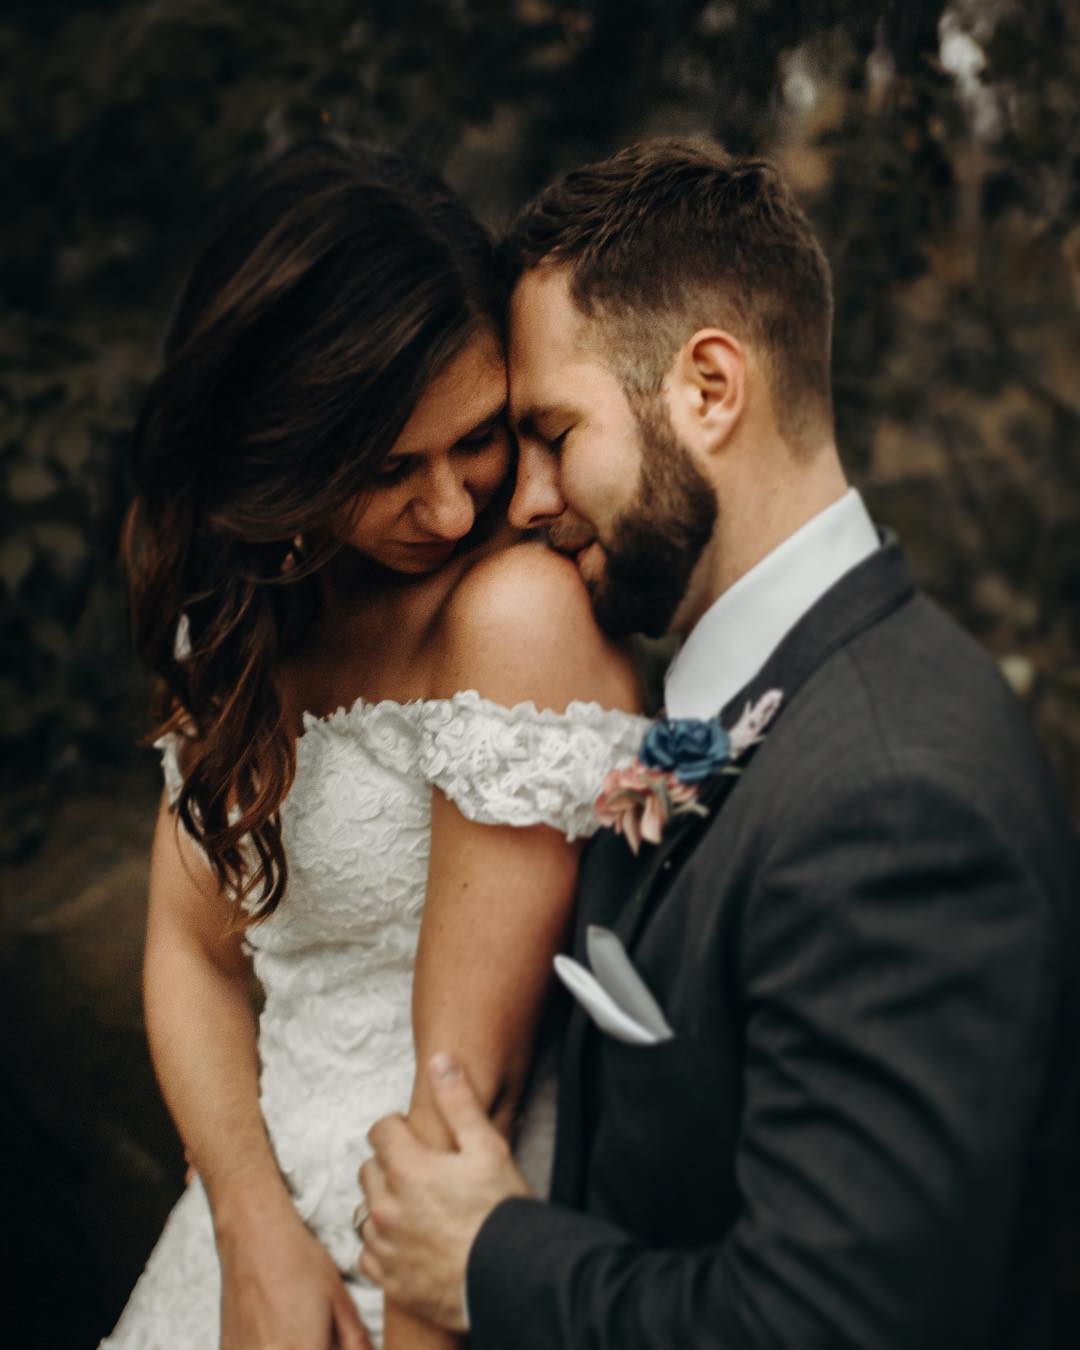 wedding poses tender kiss on the shoulder ideas